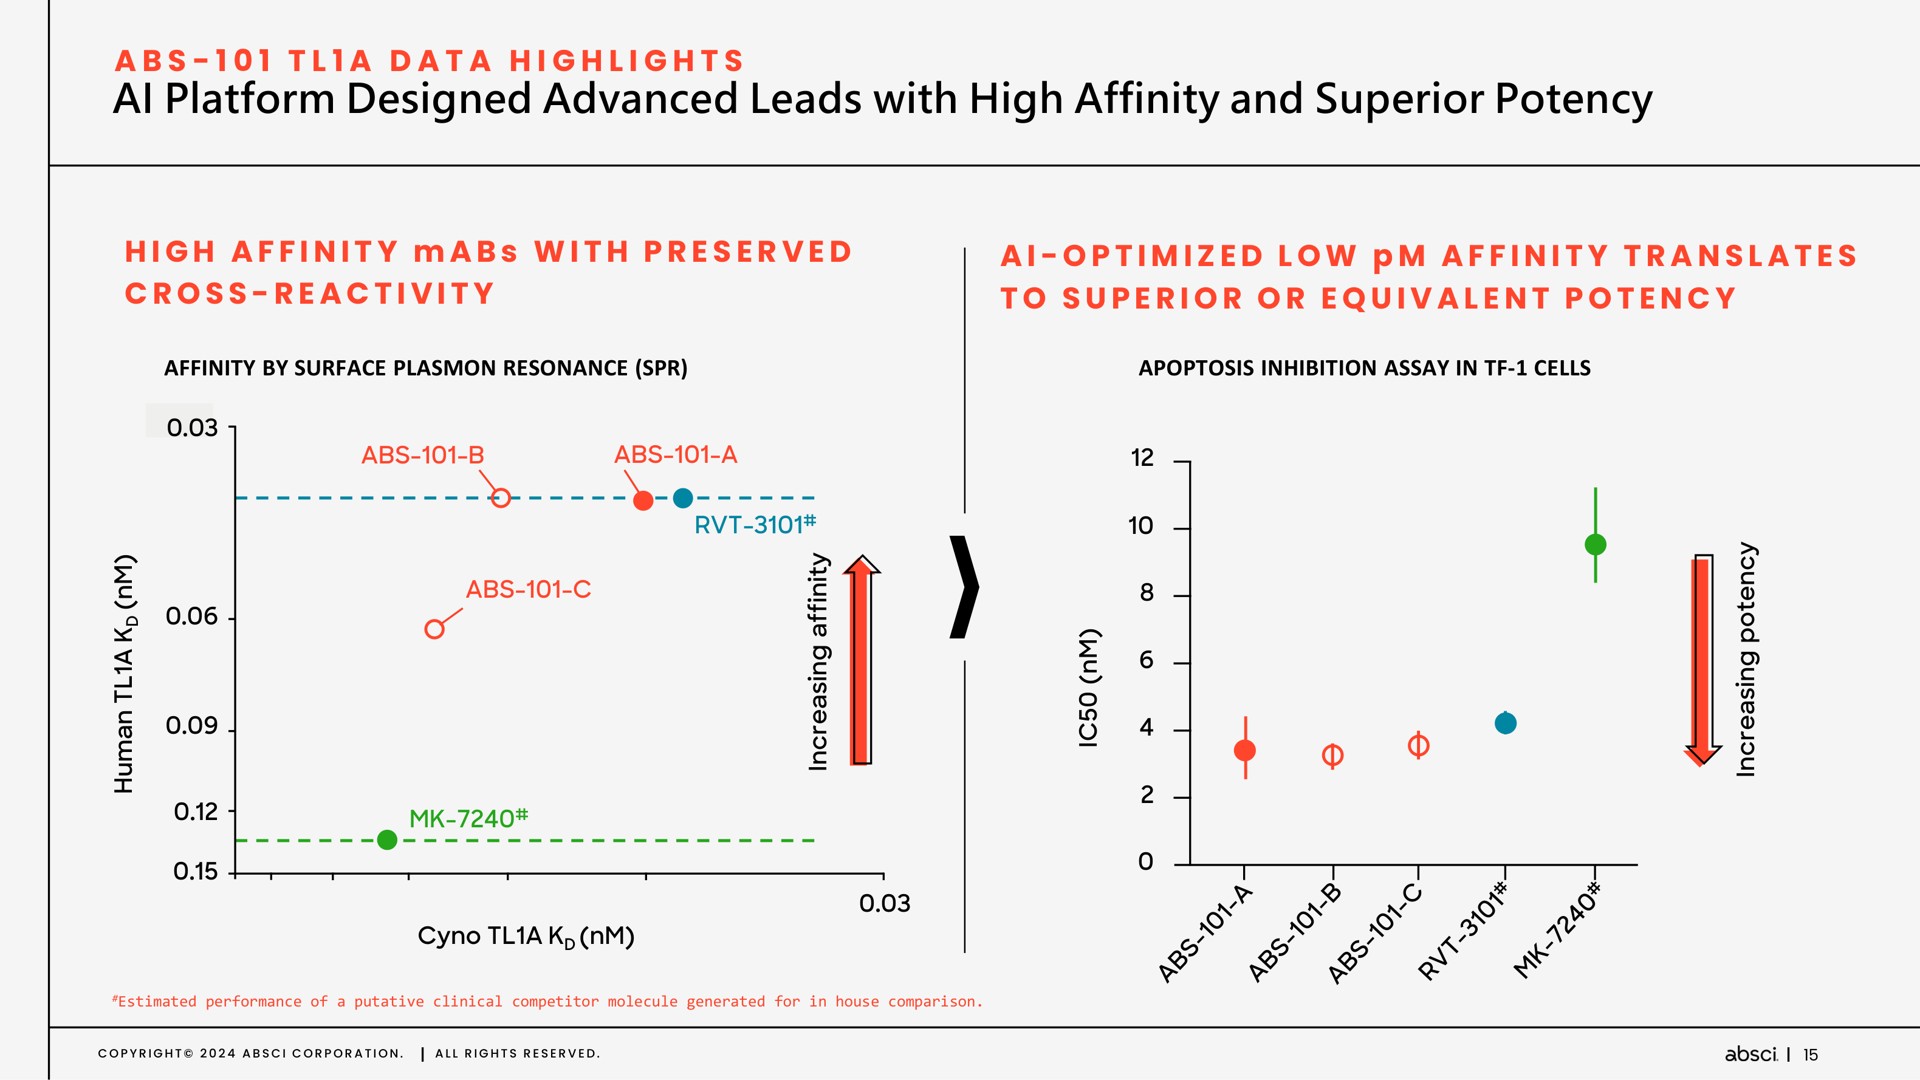 platform designed advanced leads with high affinity and superior potency data highlights | Absci